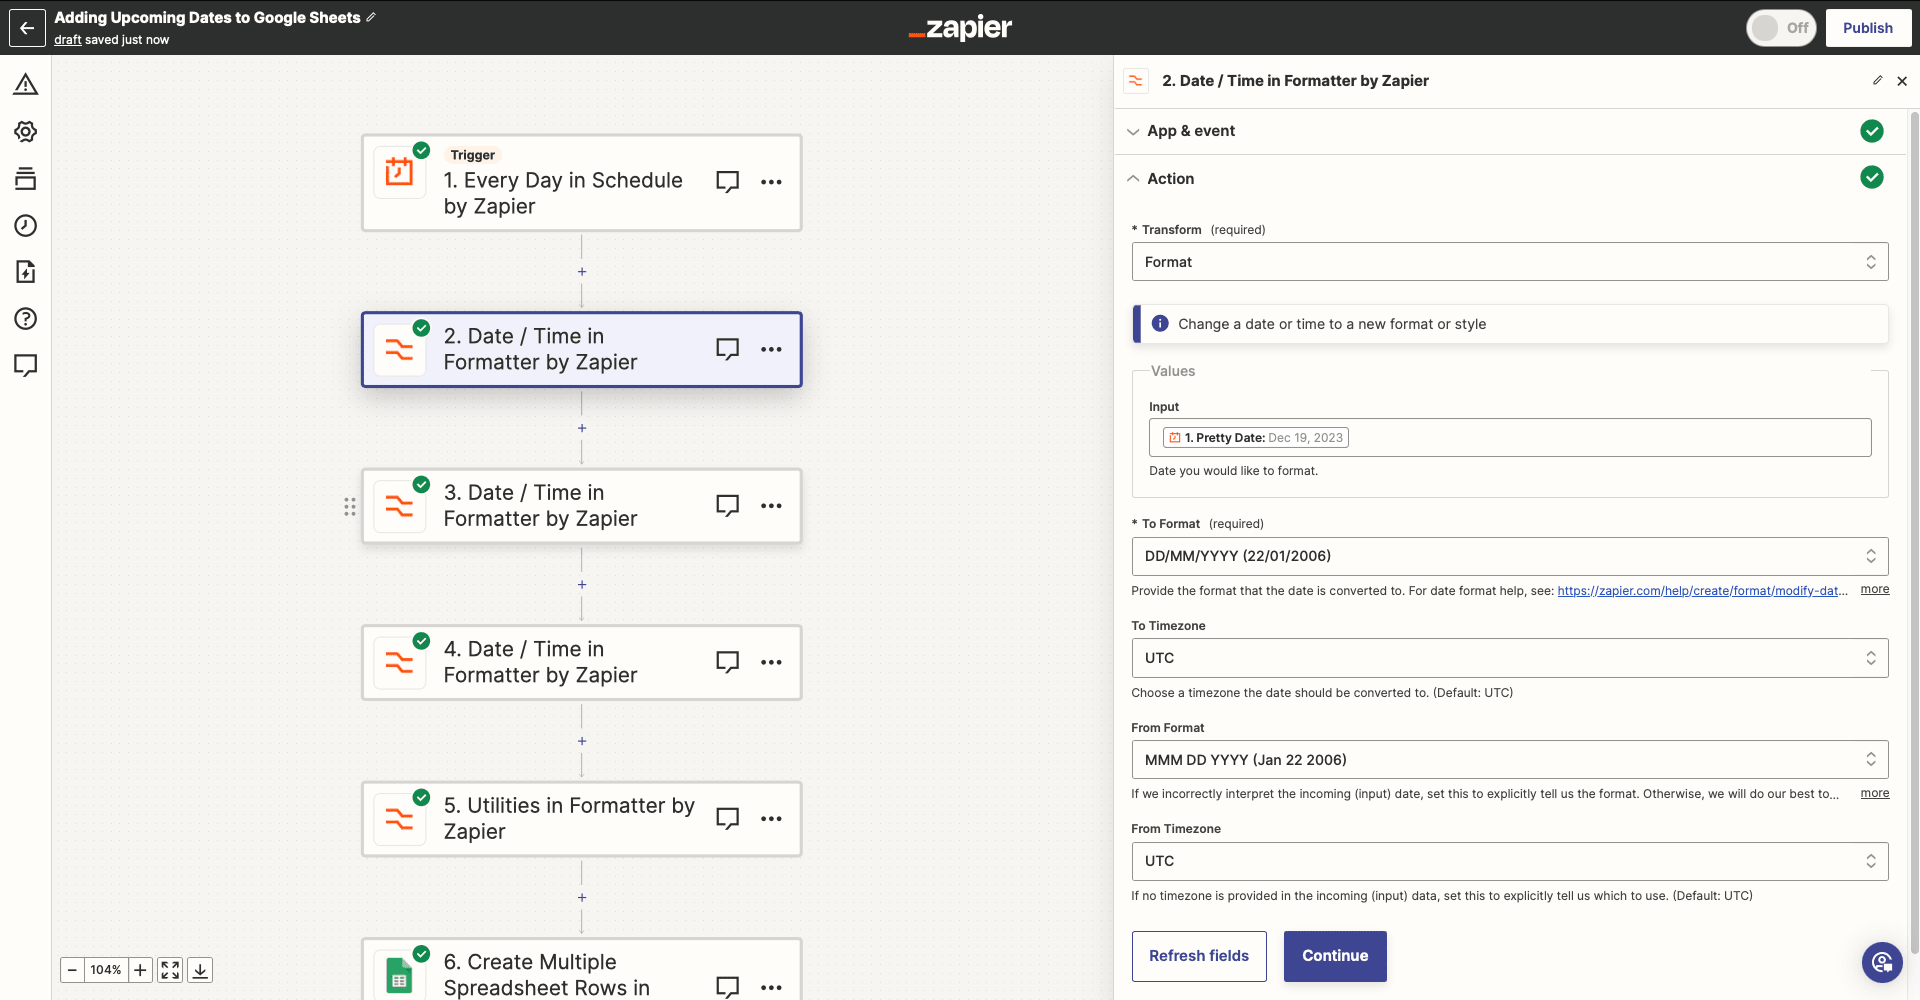 Screenshot of Zapier Date / Time in Formatter by Zapier action